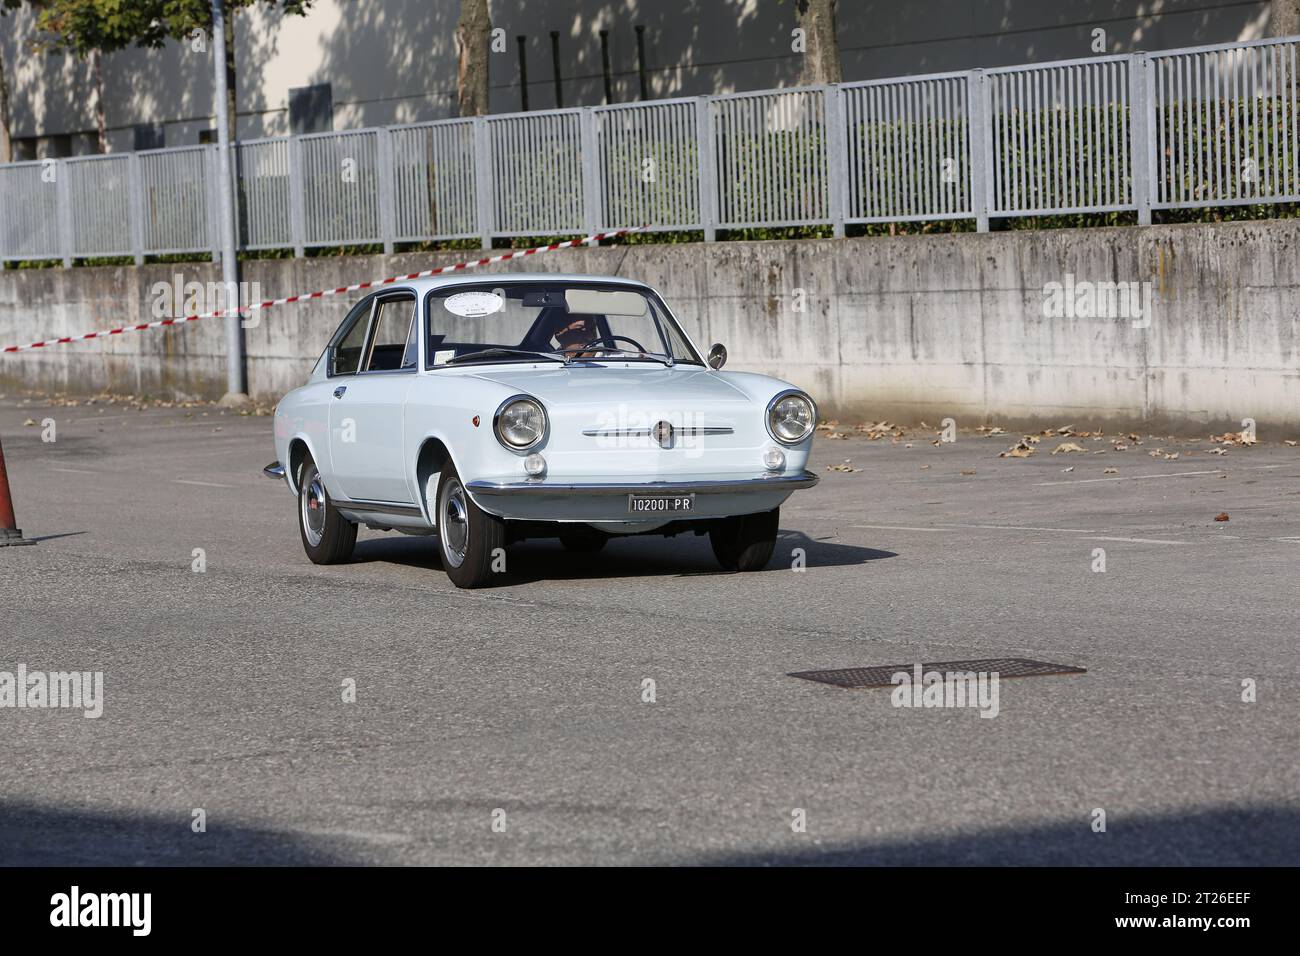 Bibbiano-Reggio Emilia Italy - 07 15 2015 : Free rally of vintage cars in the town square Fiat 850 Coupe. High quality photo Stock Photo